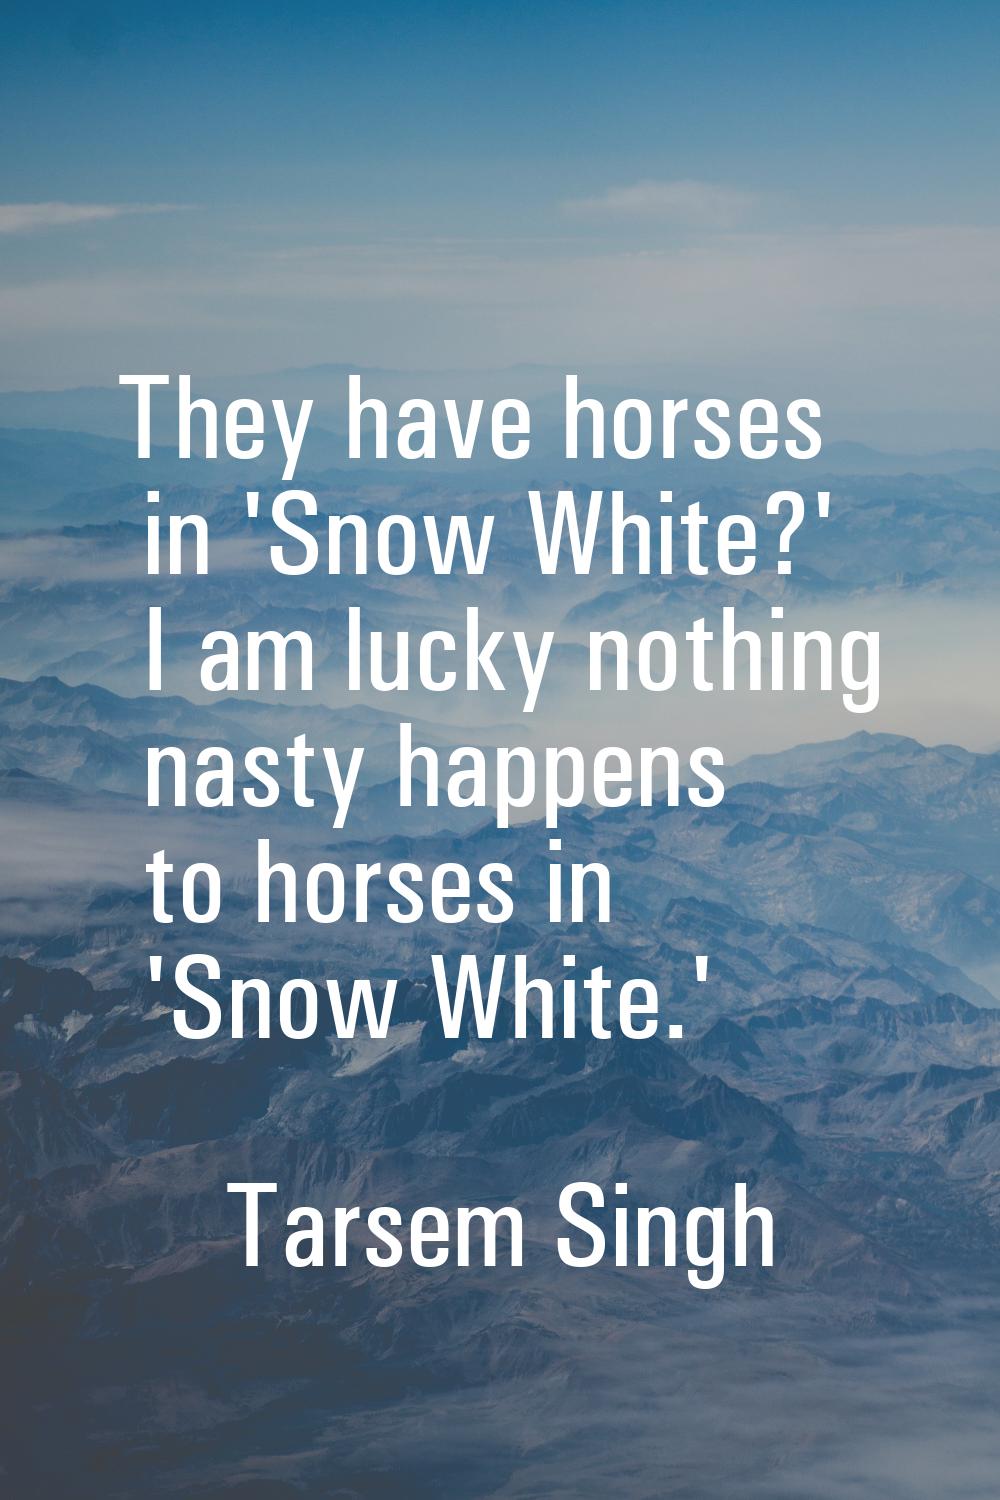 They have horses in 'Snow White?' I am lucky nothing nasty happens to horses in 'Snow White.'